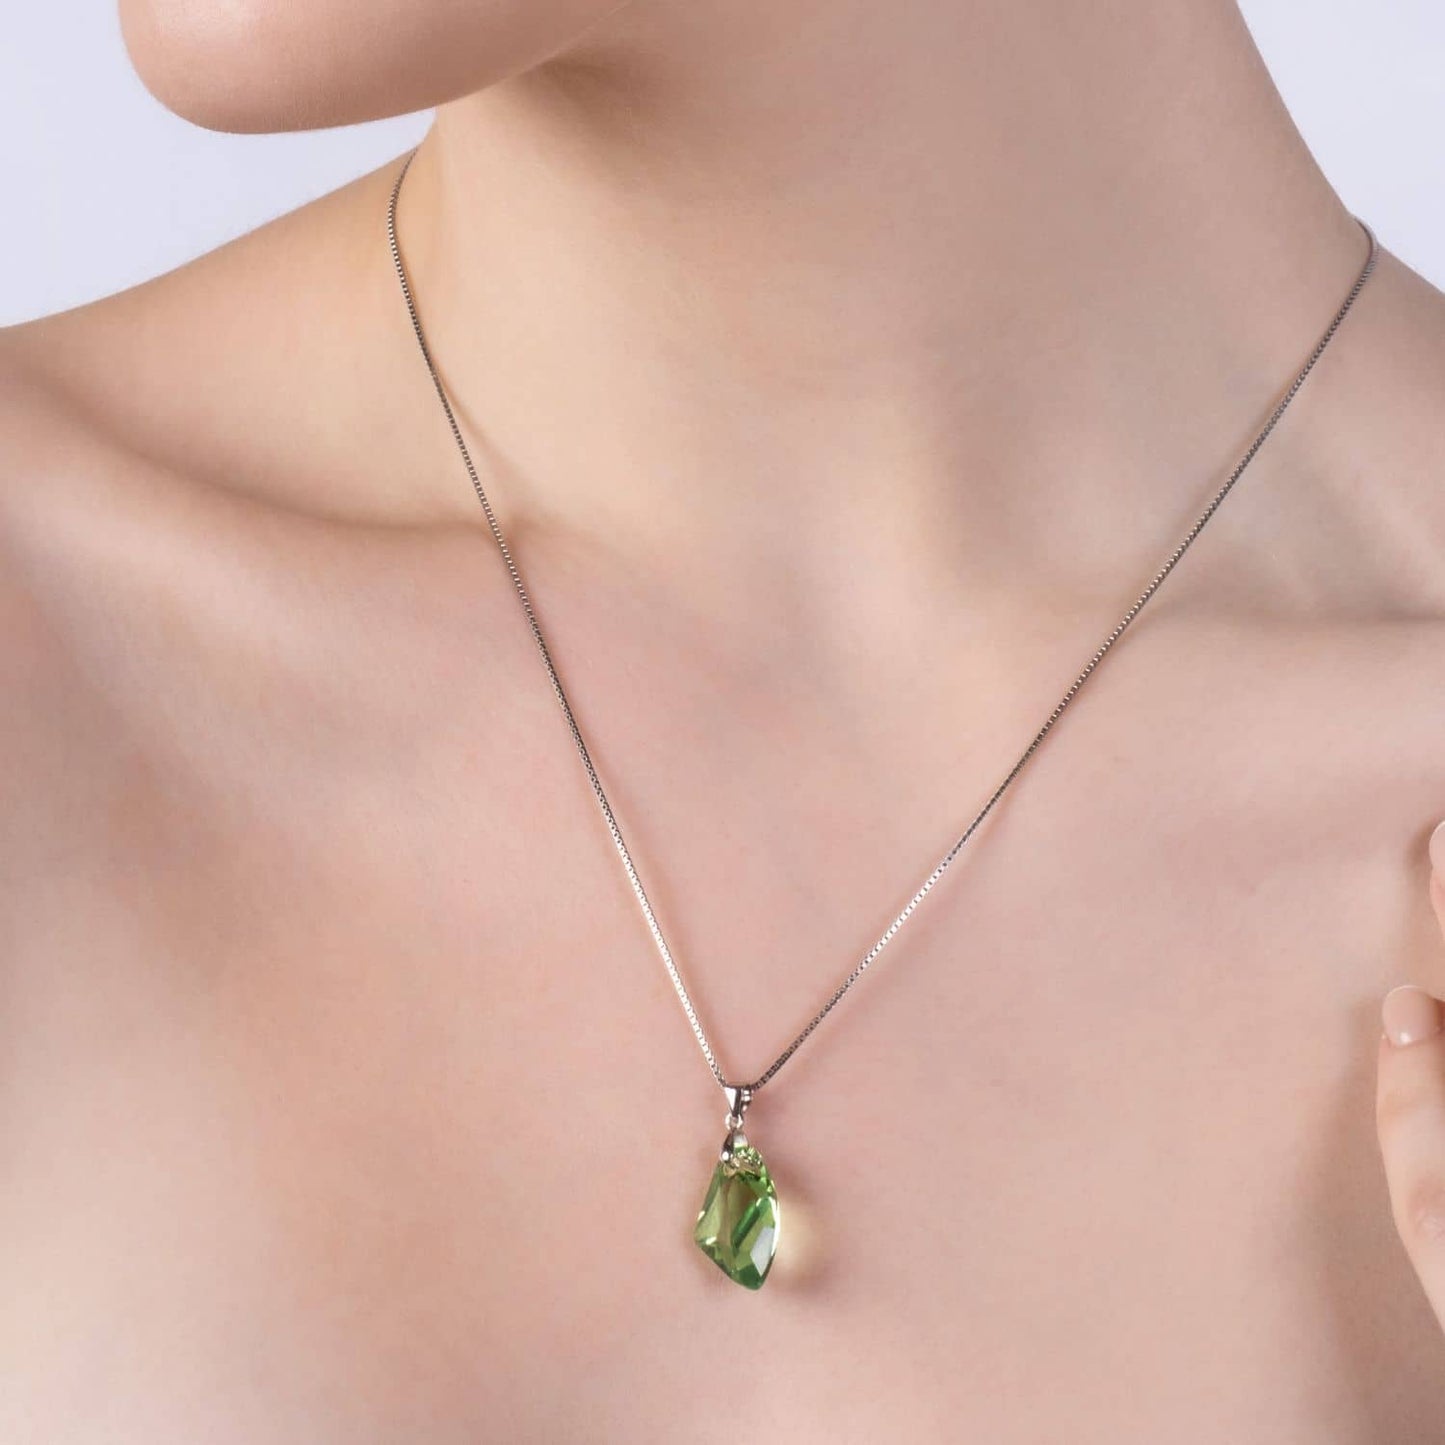 Green Crystal Necklace - Made with Austrian Crystals